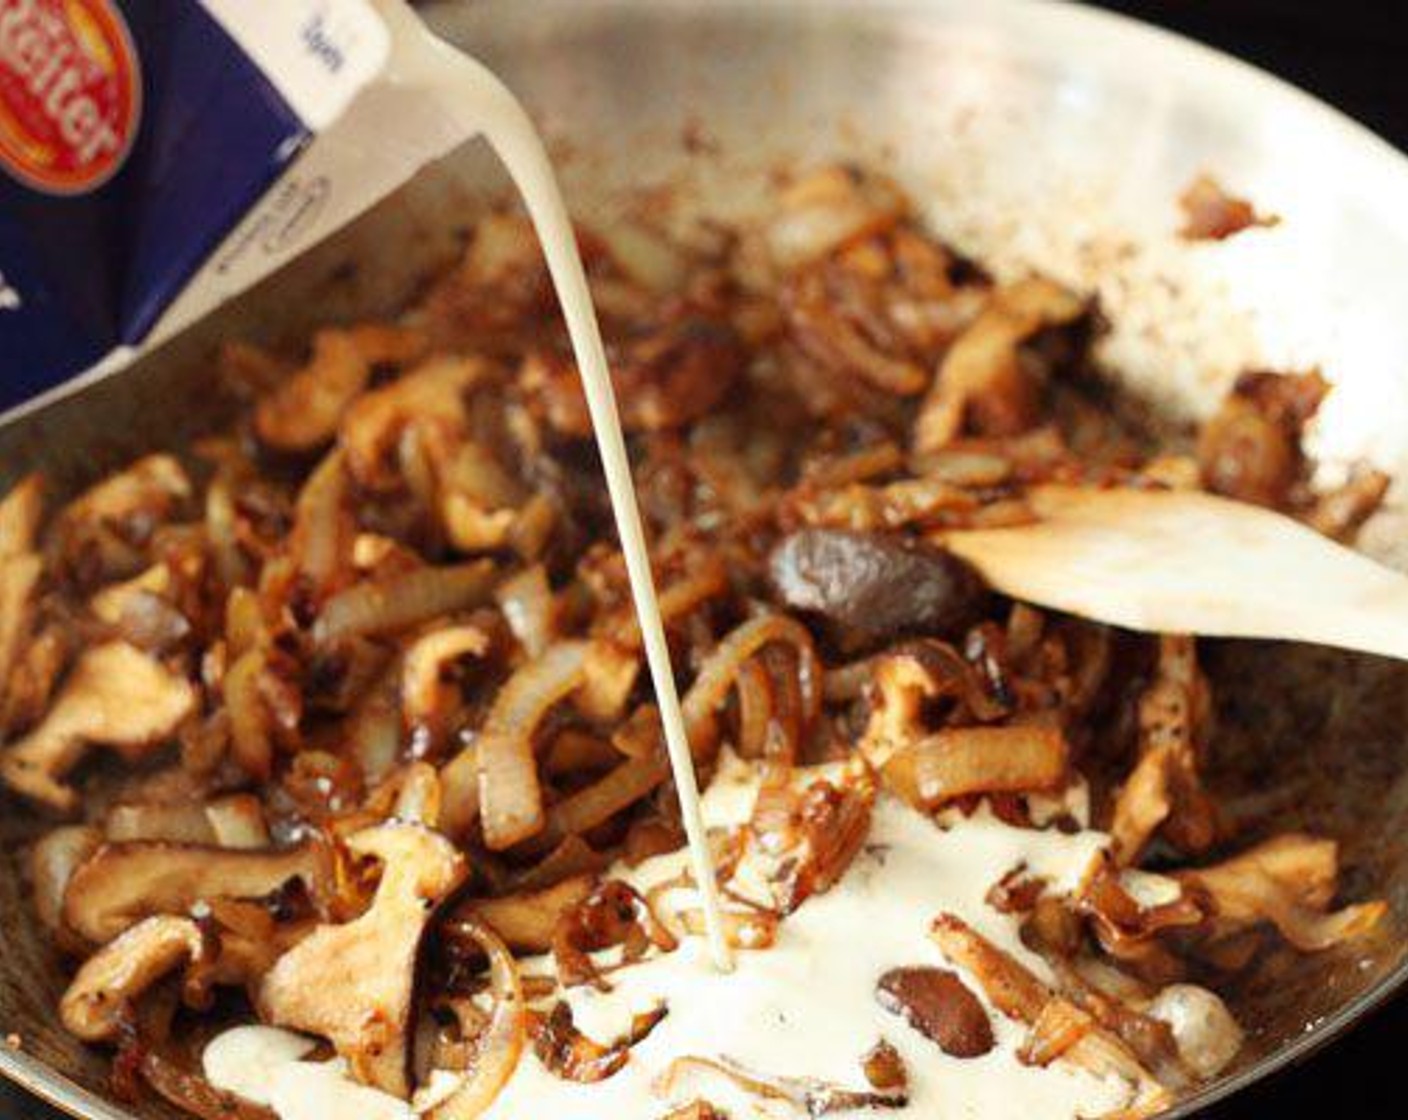 step 4 As the spaghetti cooks and the onions are mostly caramelized, move the onions to one side of the frying pan. Add the last tablespoon of Unsalted Butter (1 Tbsp) to the cleared side of the pan. Add the chopped mushrooms to the pan and sauté for 2-3 minutes.